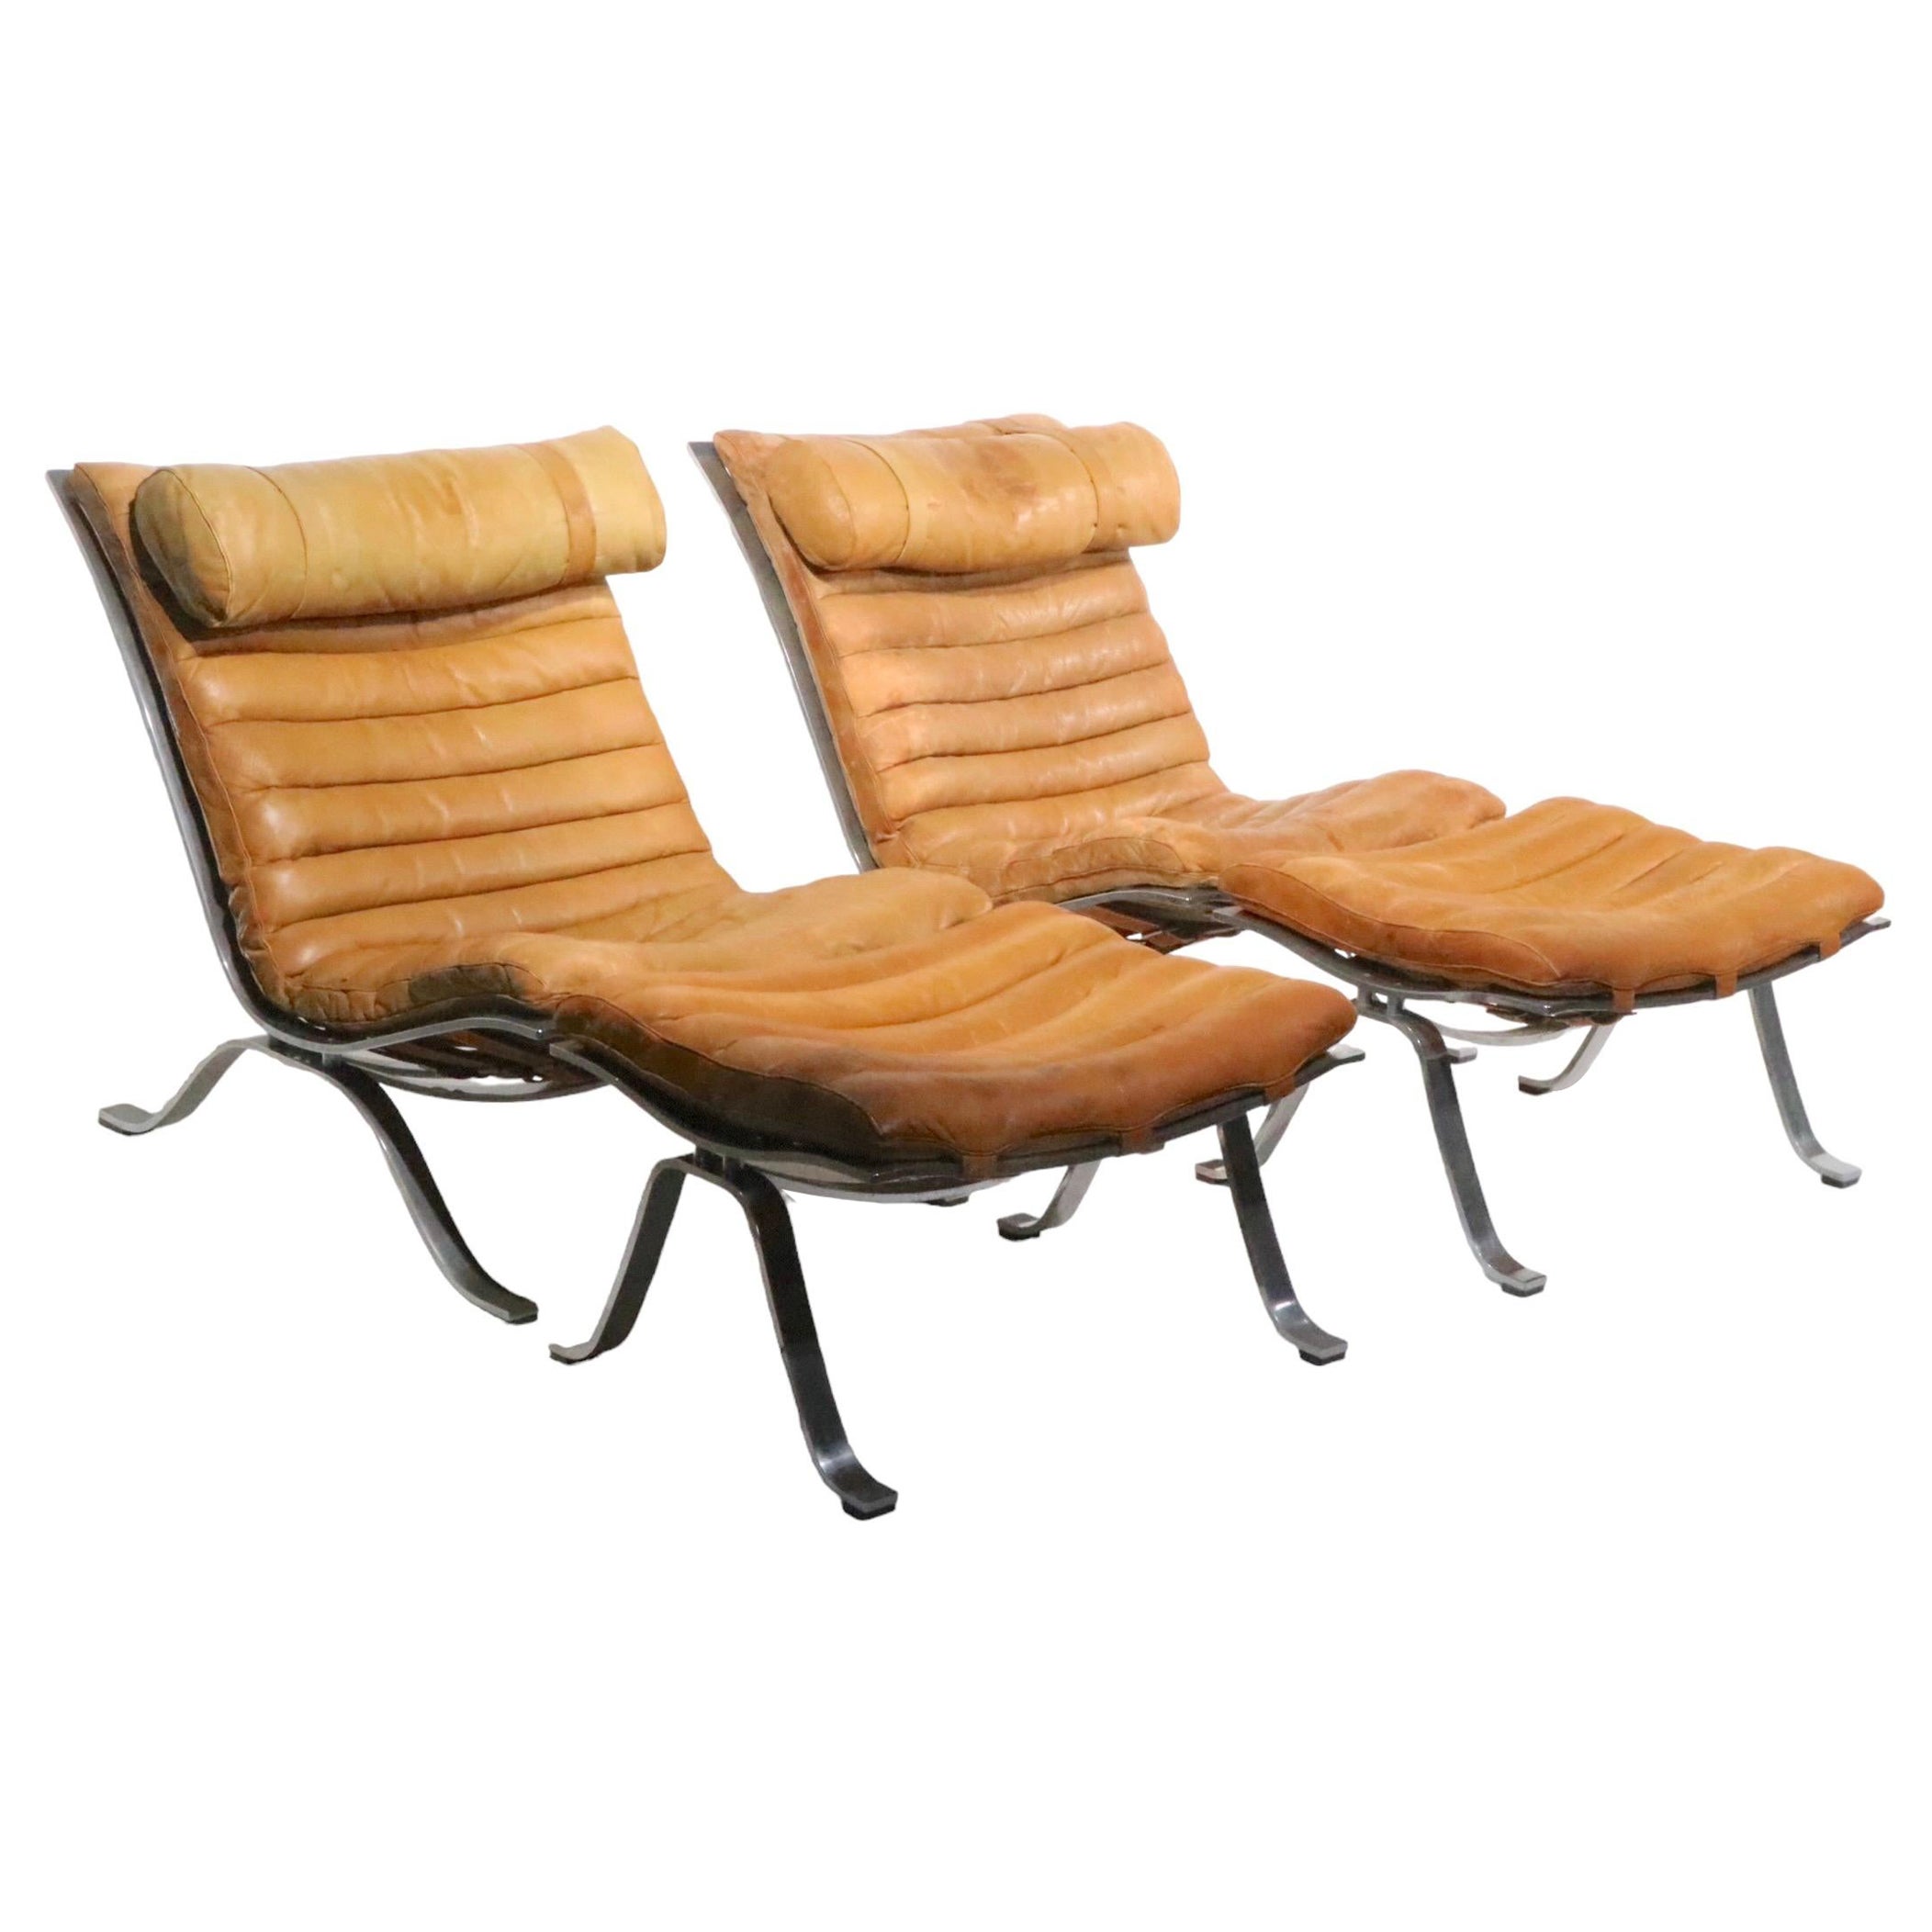 Pr. Ari Lounge Chairs with Ottomans by Arne Norell Made in Sweden c. 1960's